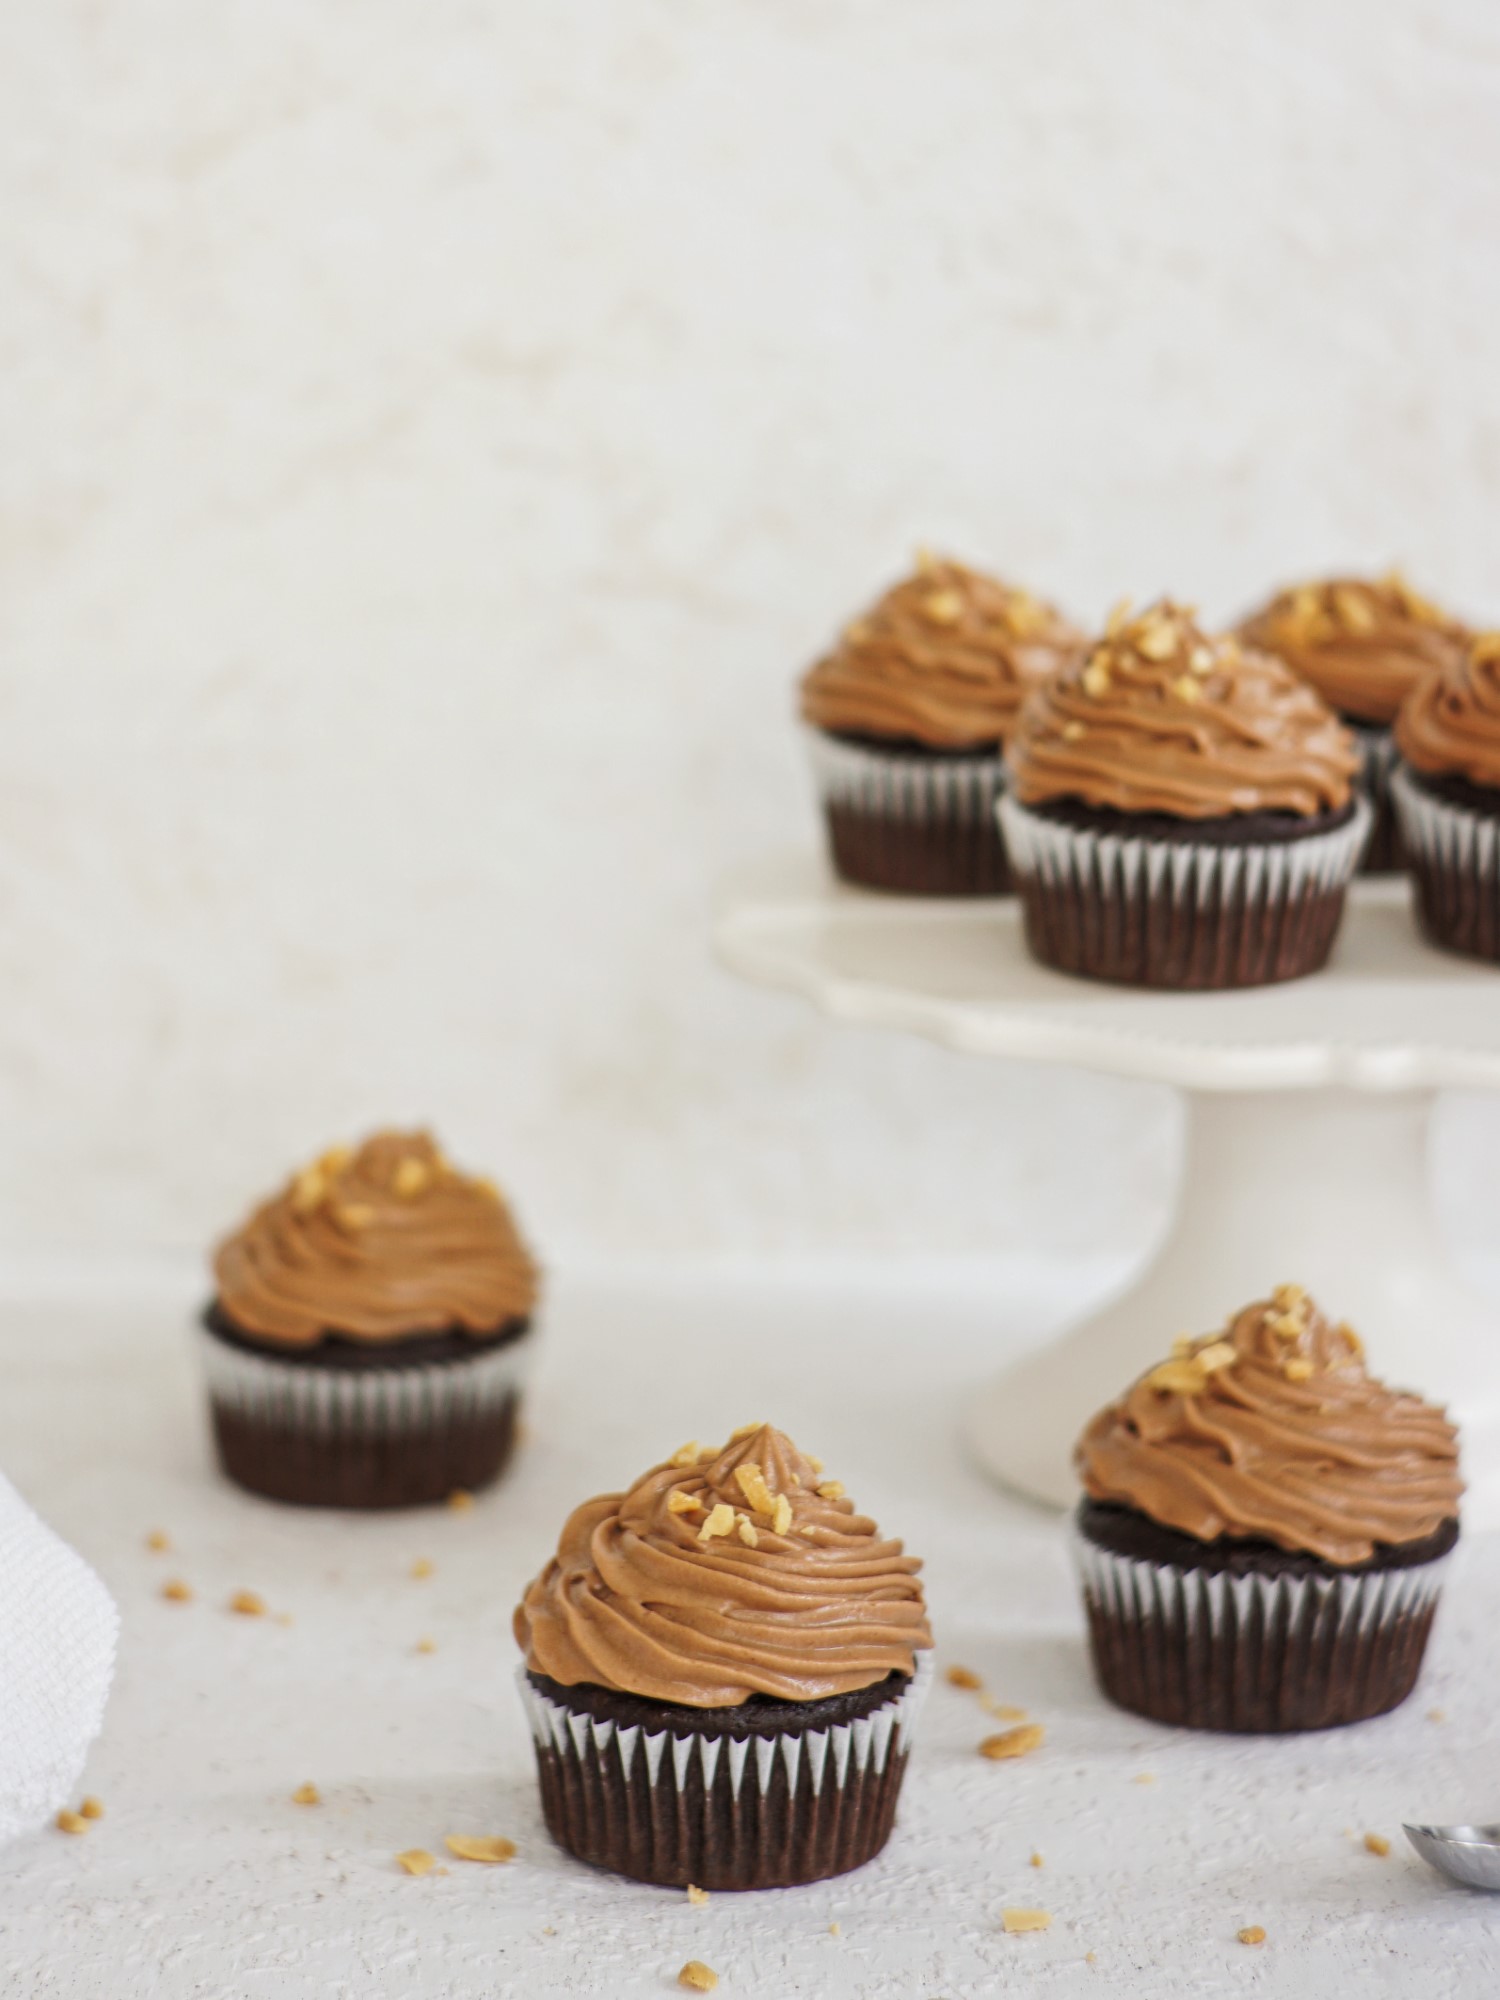 Snickers Cupcakes - Title of the Recipe